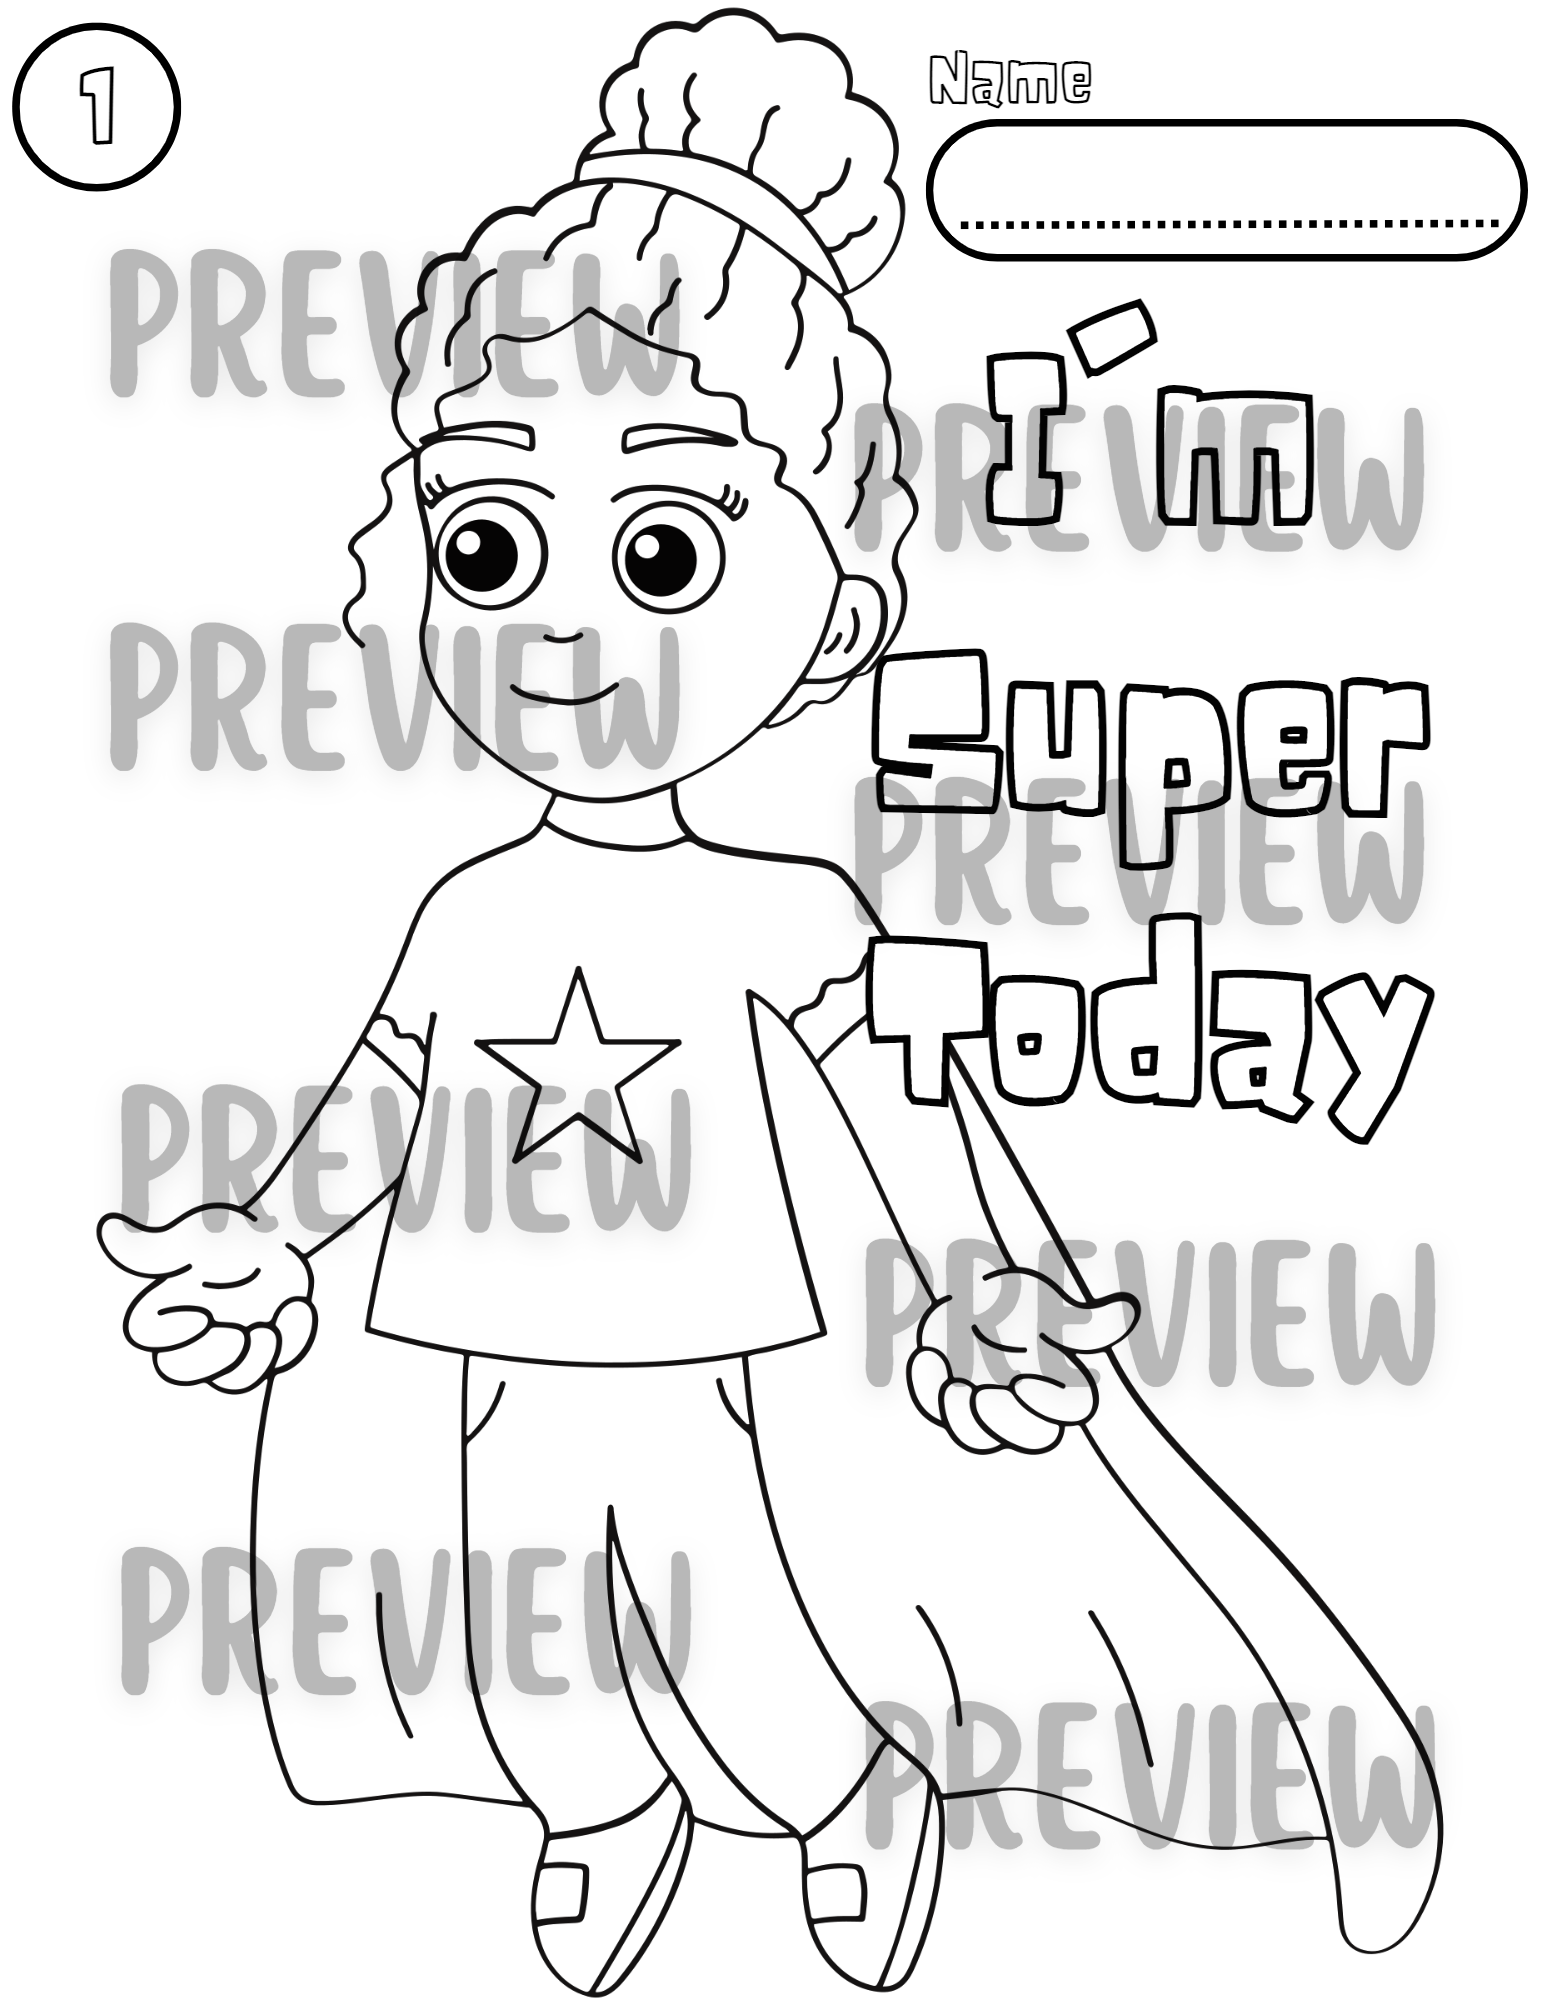 Superhero kids coloring pages with motivational prompts kids coloring pages made by teachers